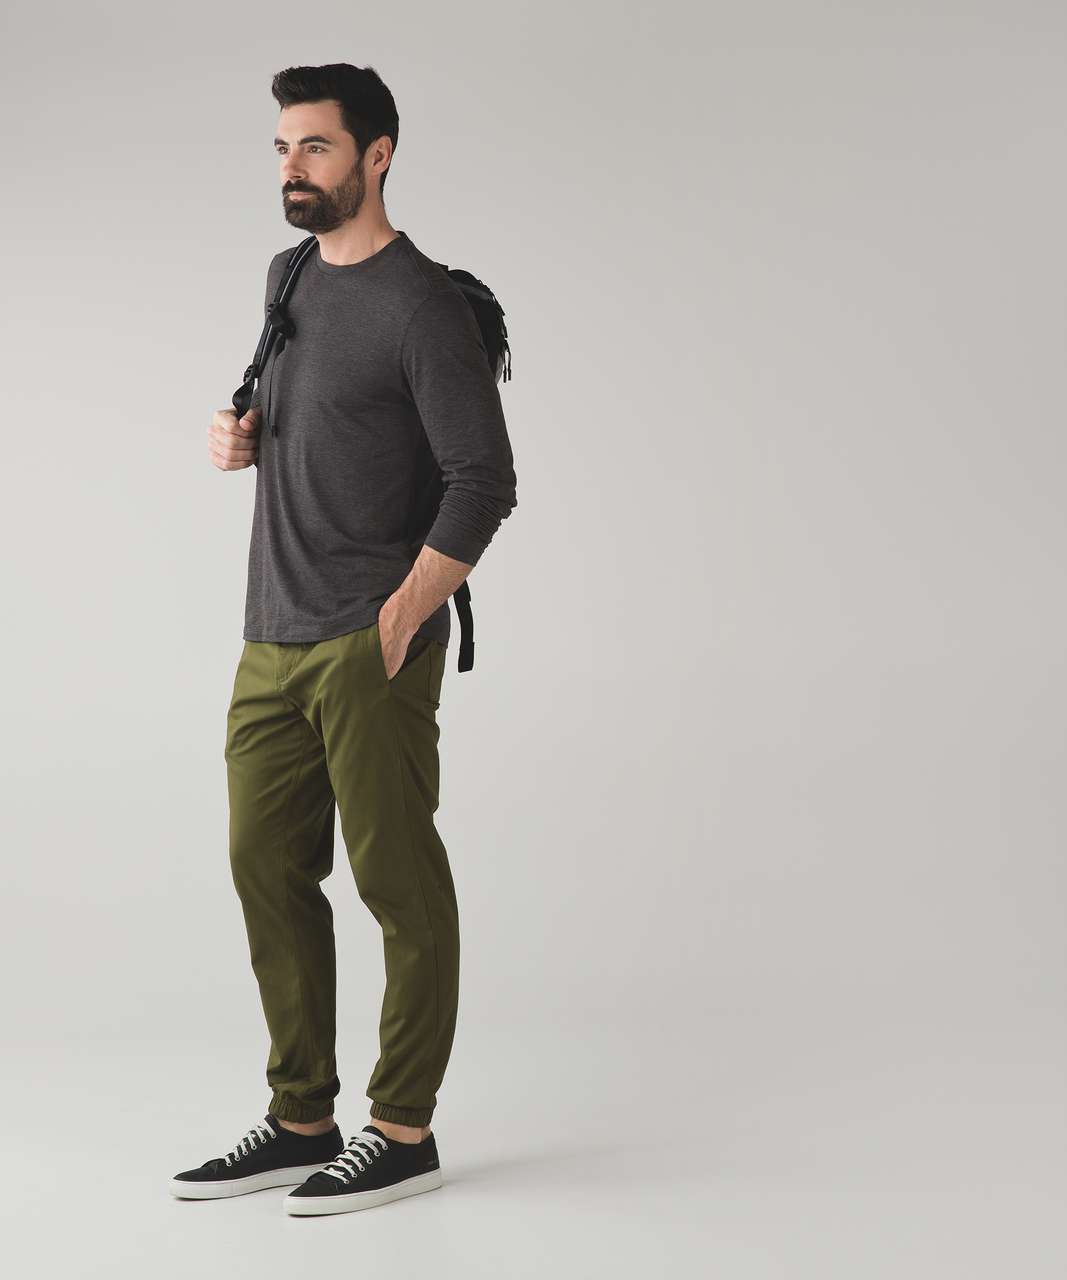 Lululemon What The Cuff Pant - Brave Olive